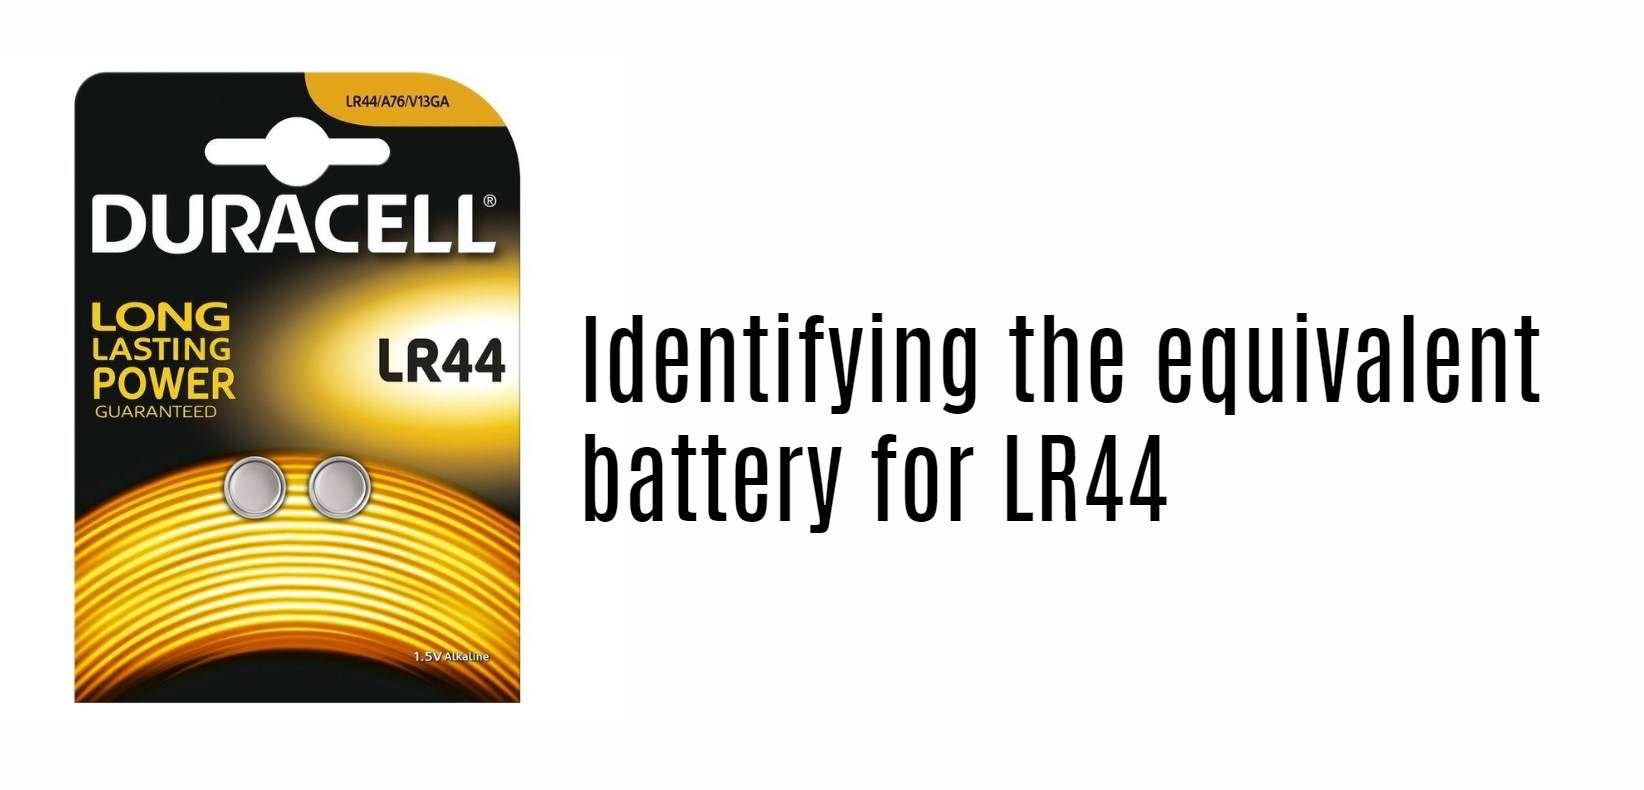 Identifying the equivalent battery for LR44